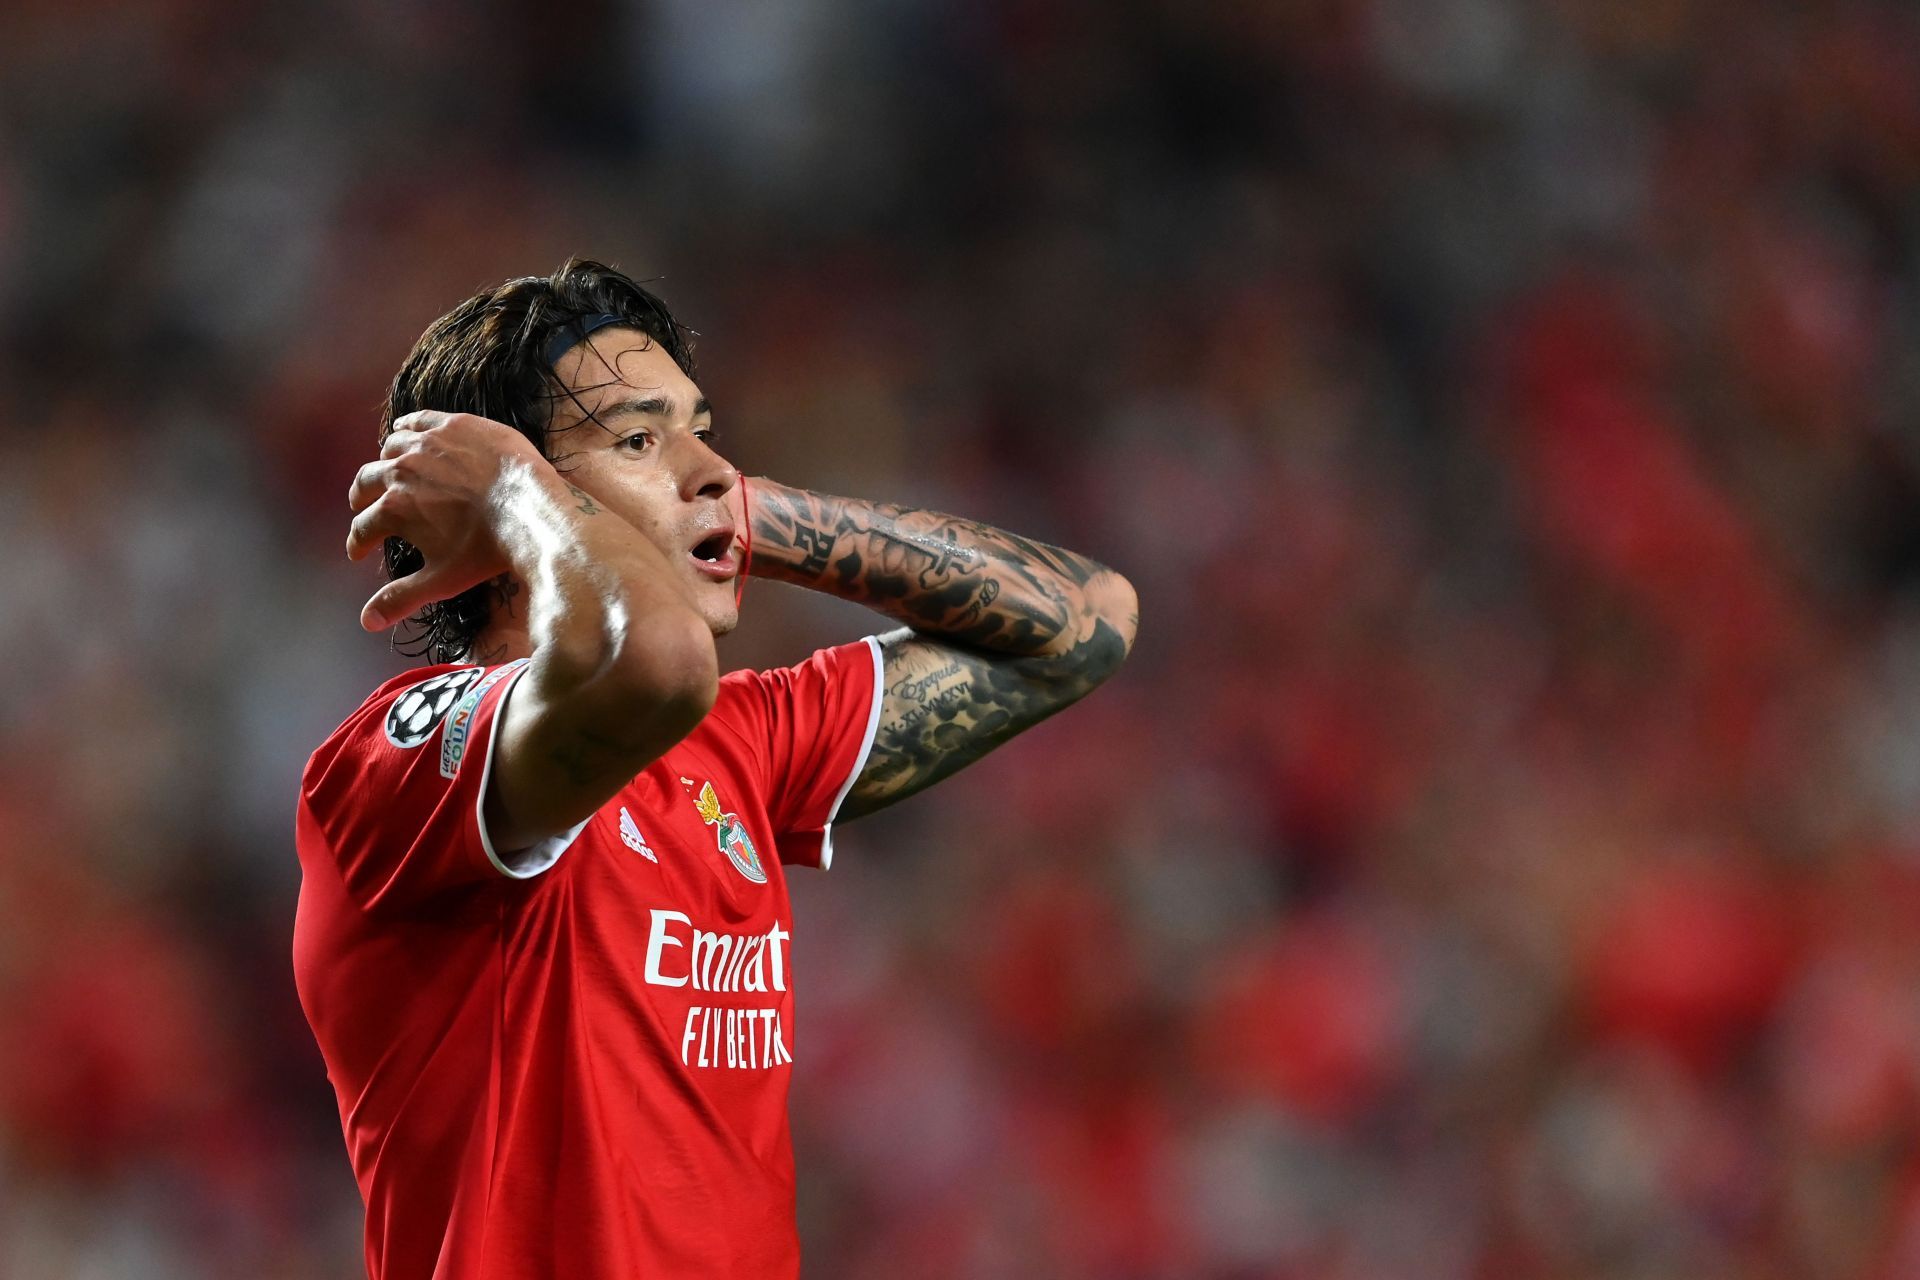 Darwin Nunez in action for Portuguese giants Benfica